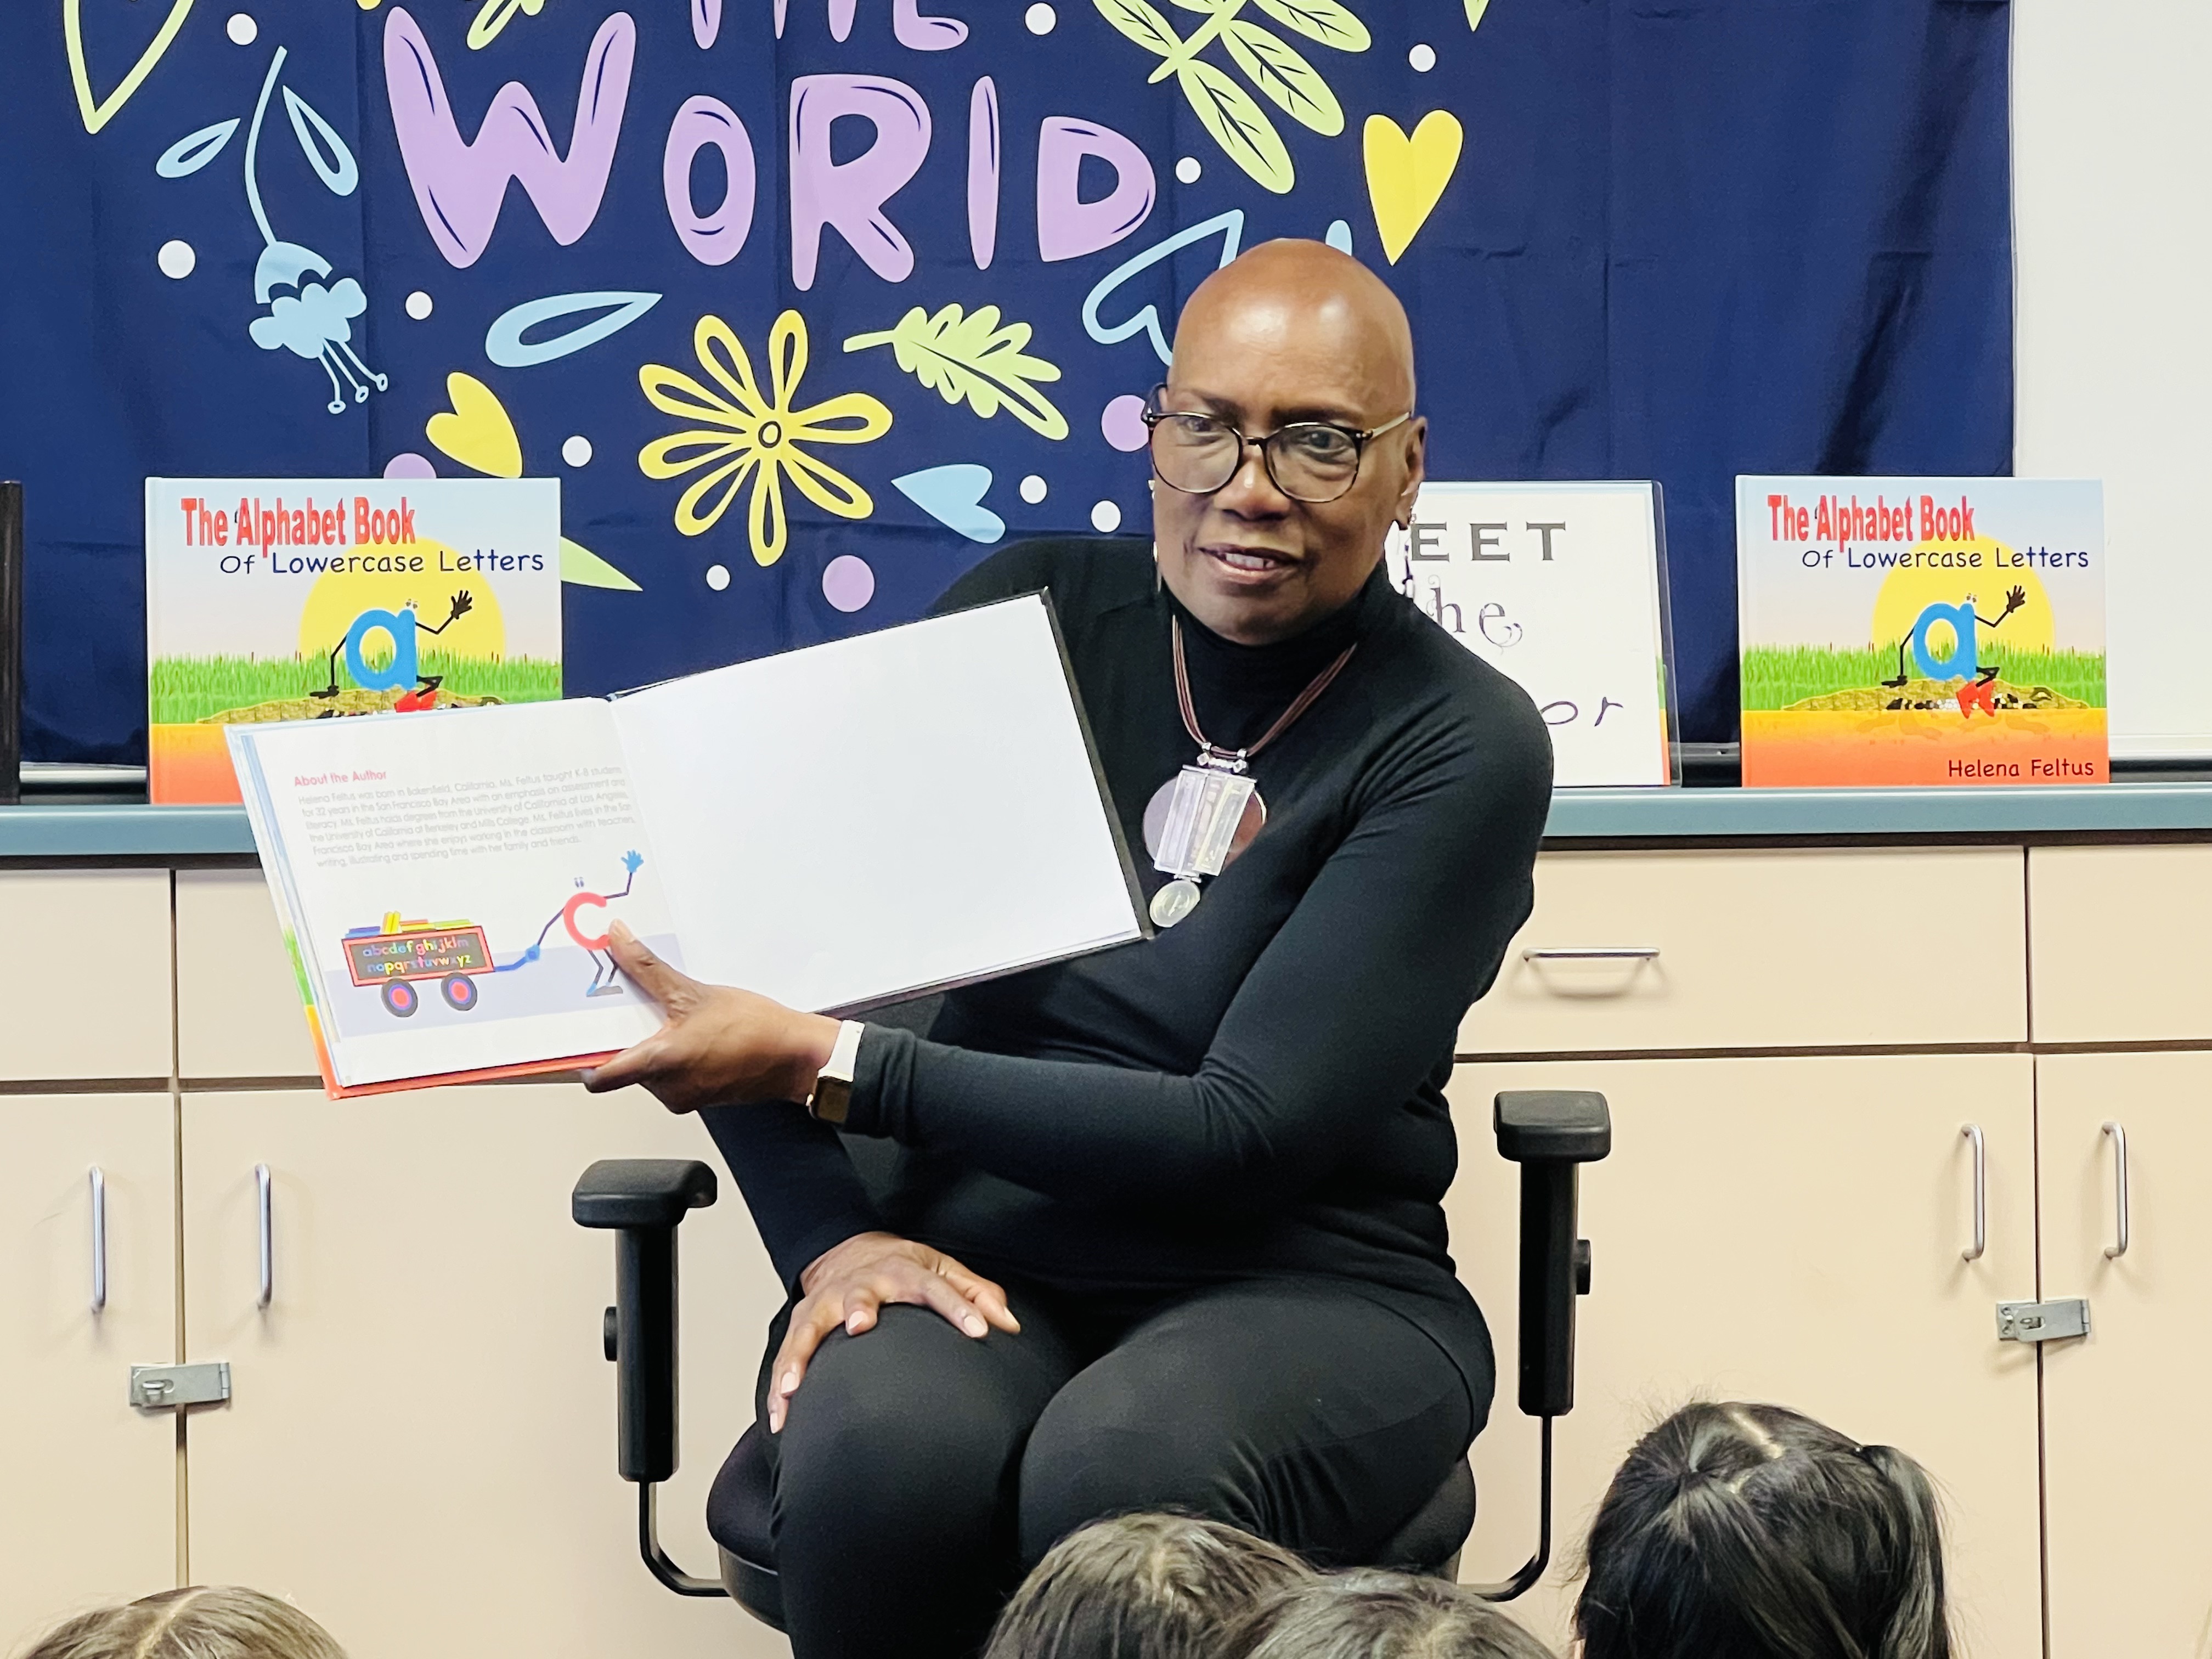 A photo shows Helena Feltus as she reads her book, “The Alphabet Book of Lowercase Letters,” to a group of children in a classroom.